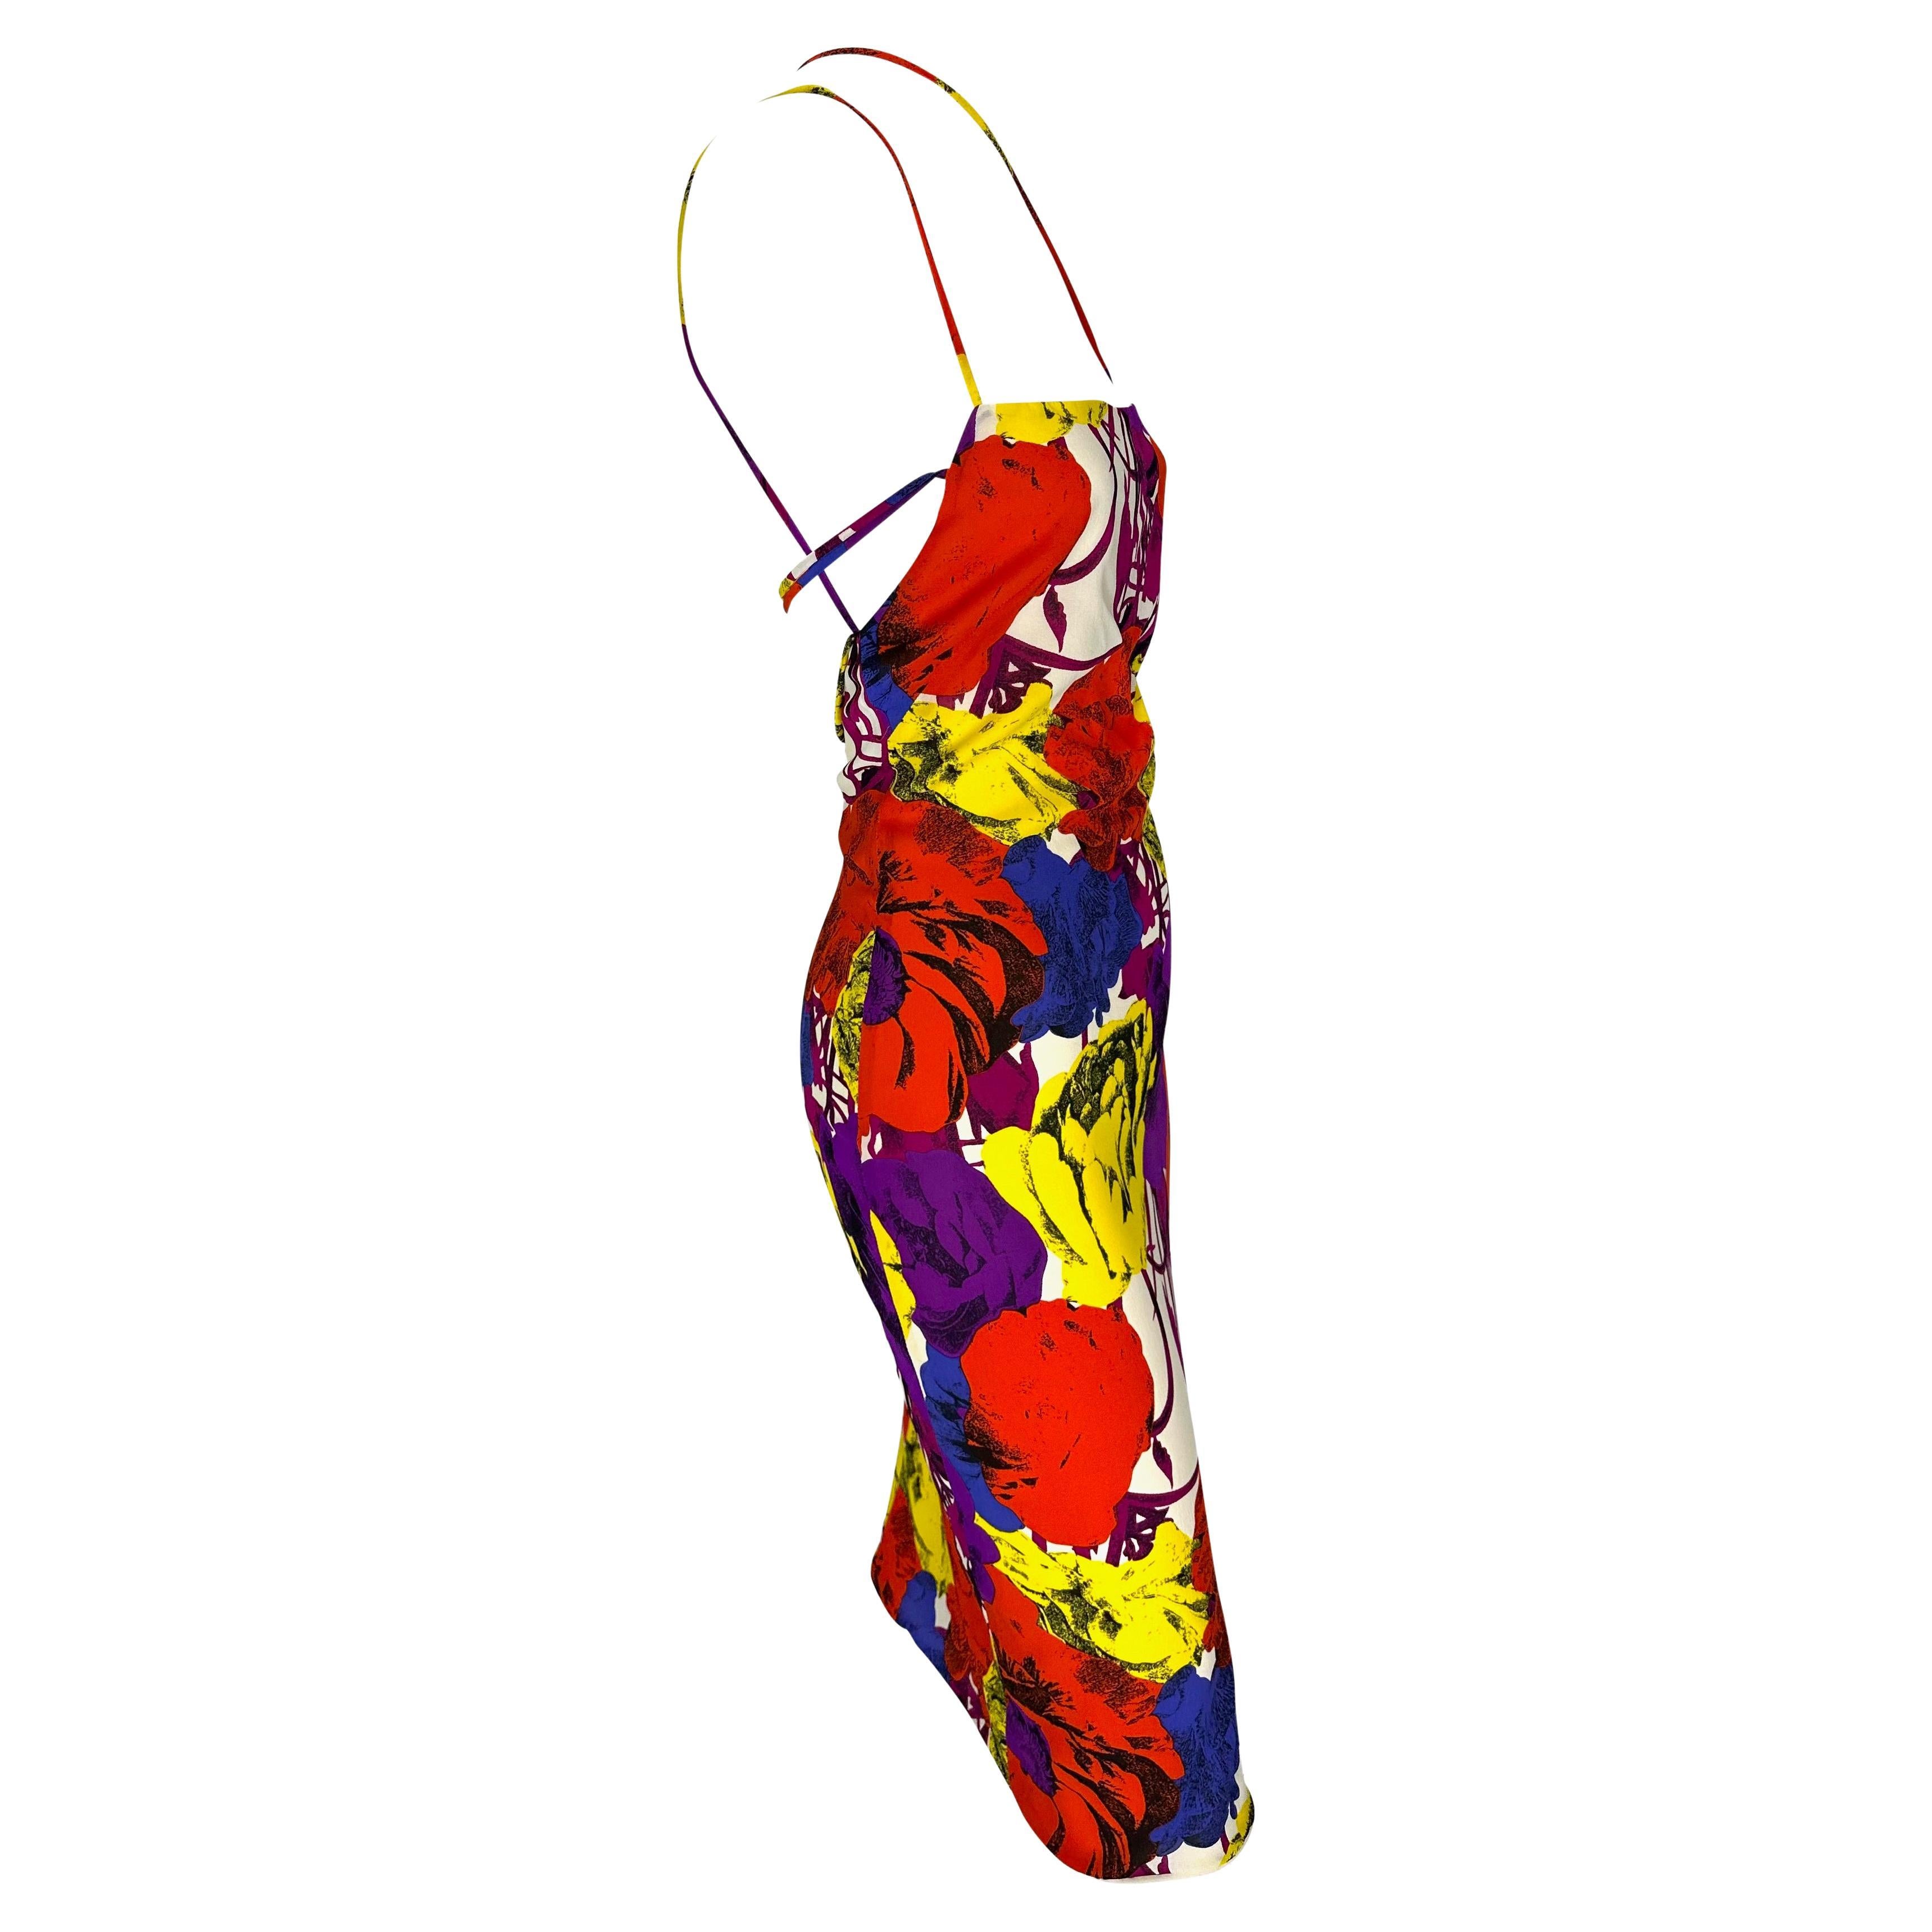 S/S 2002 Gianni Versace by Donatella Pop Art Floral Print Lace-Up Backless Dress For Sale 5